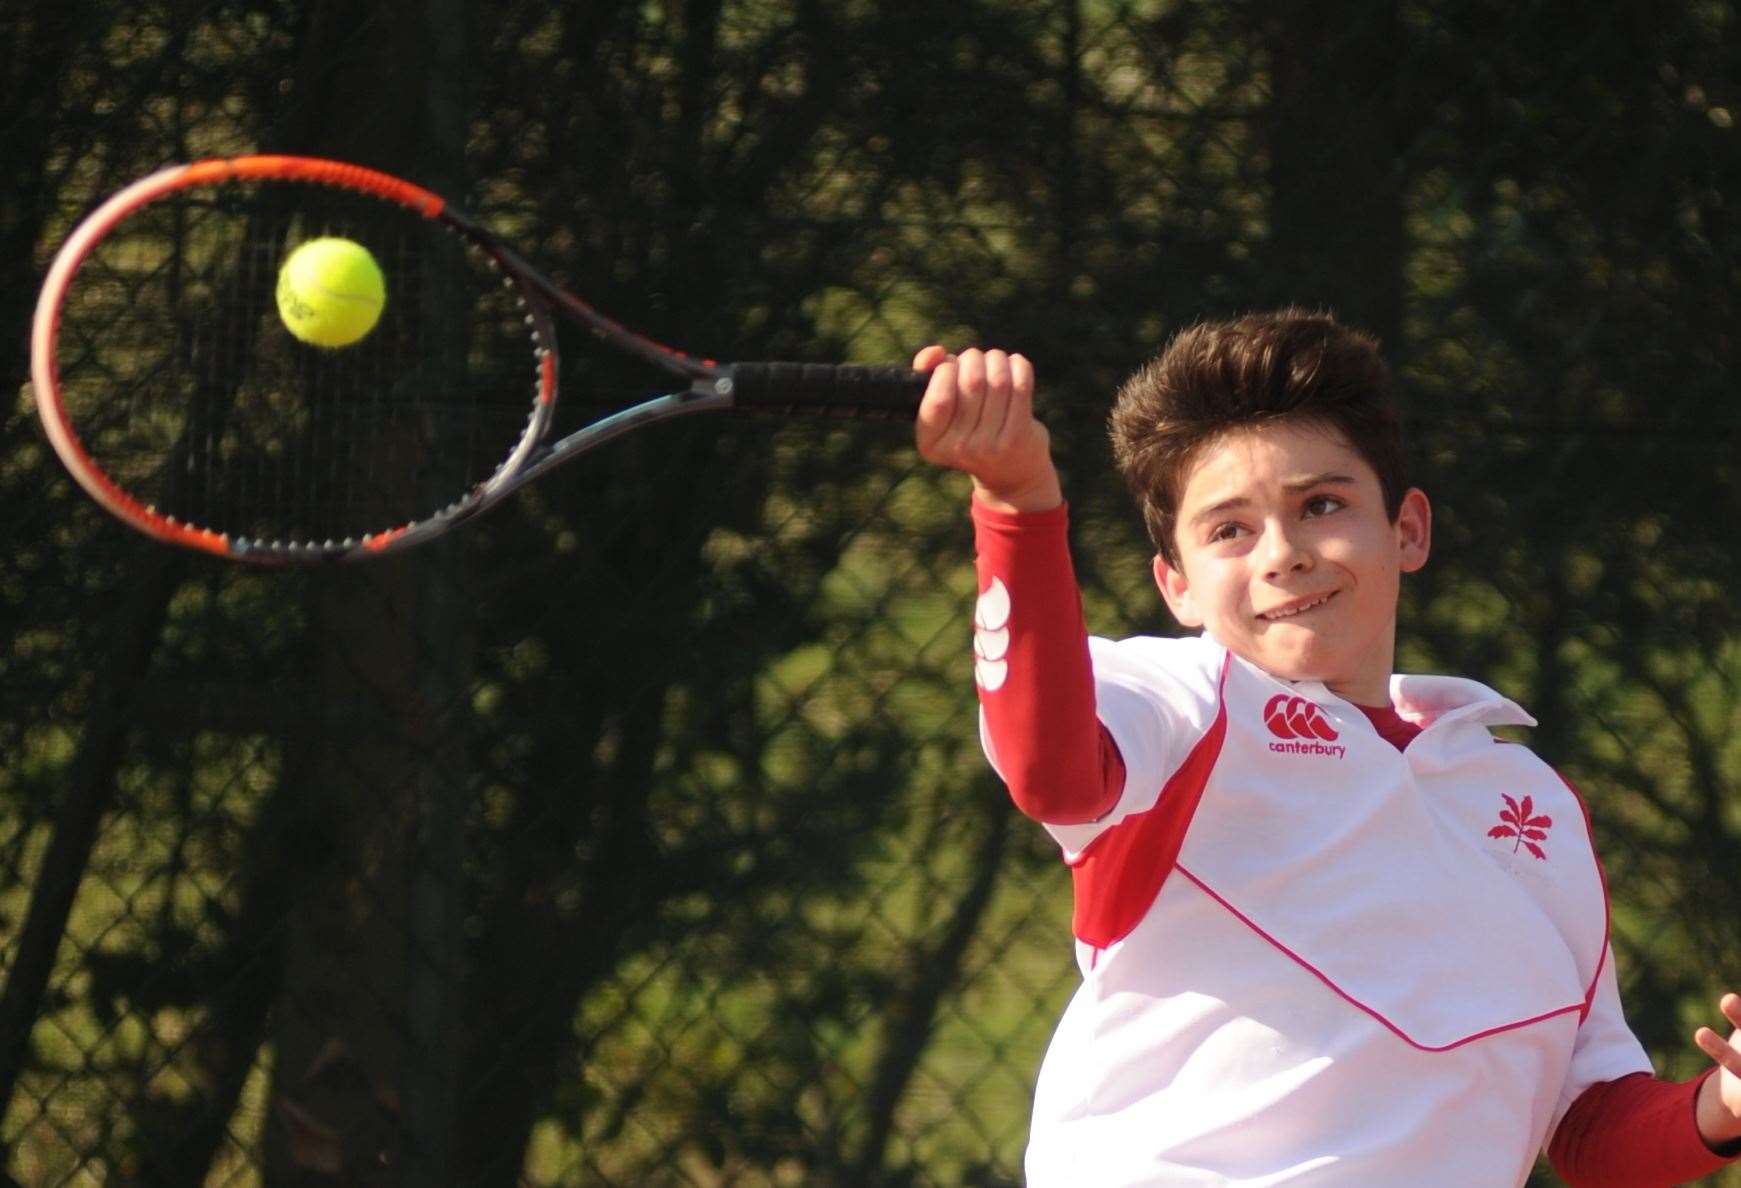 Tennis can be played again outdoors after new measures announced by the government